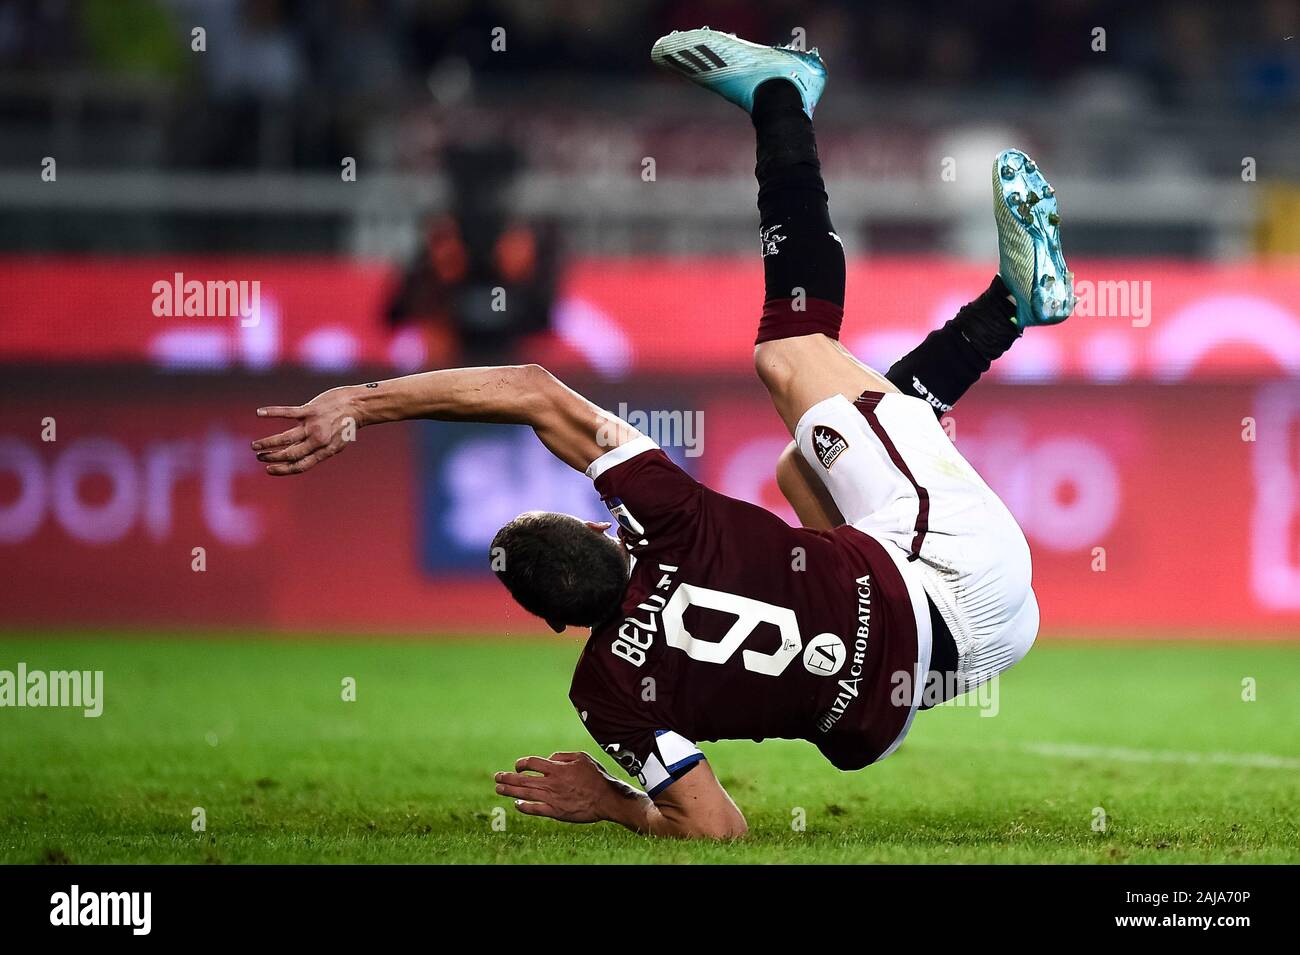 Turin, Italy. 26 September, 2019: Andrea Belotti of Torino FC scores a goal from an bicycle kick during the Serie A football match between Torino FC and AC Milan. Torino FC won 2-1 over AC Milan. Credit: Nicolò Campo/Alamy Live News Stock Photo